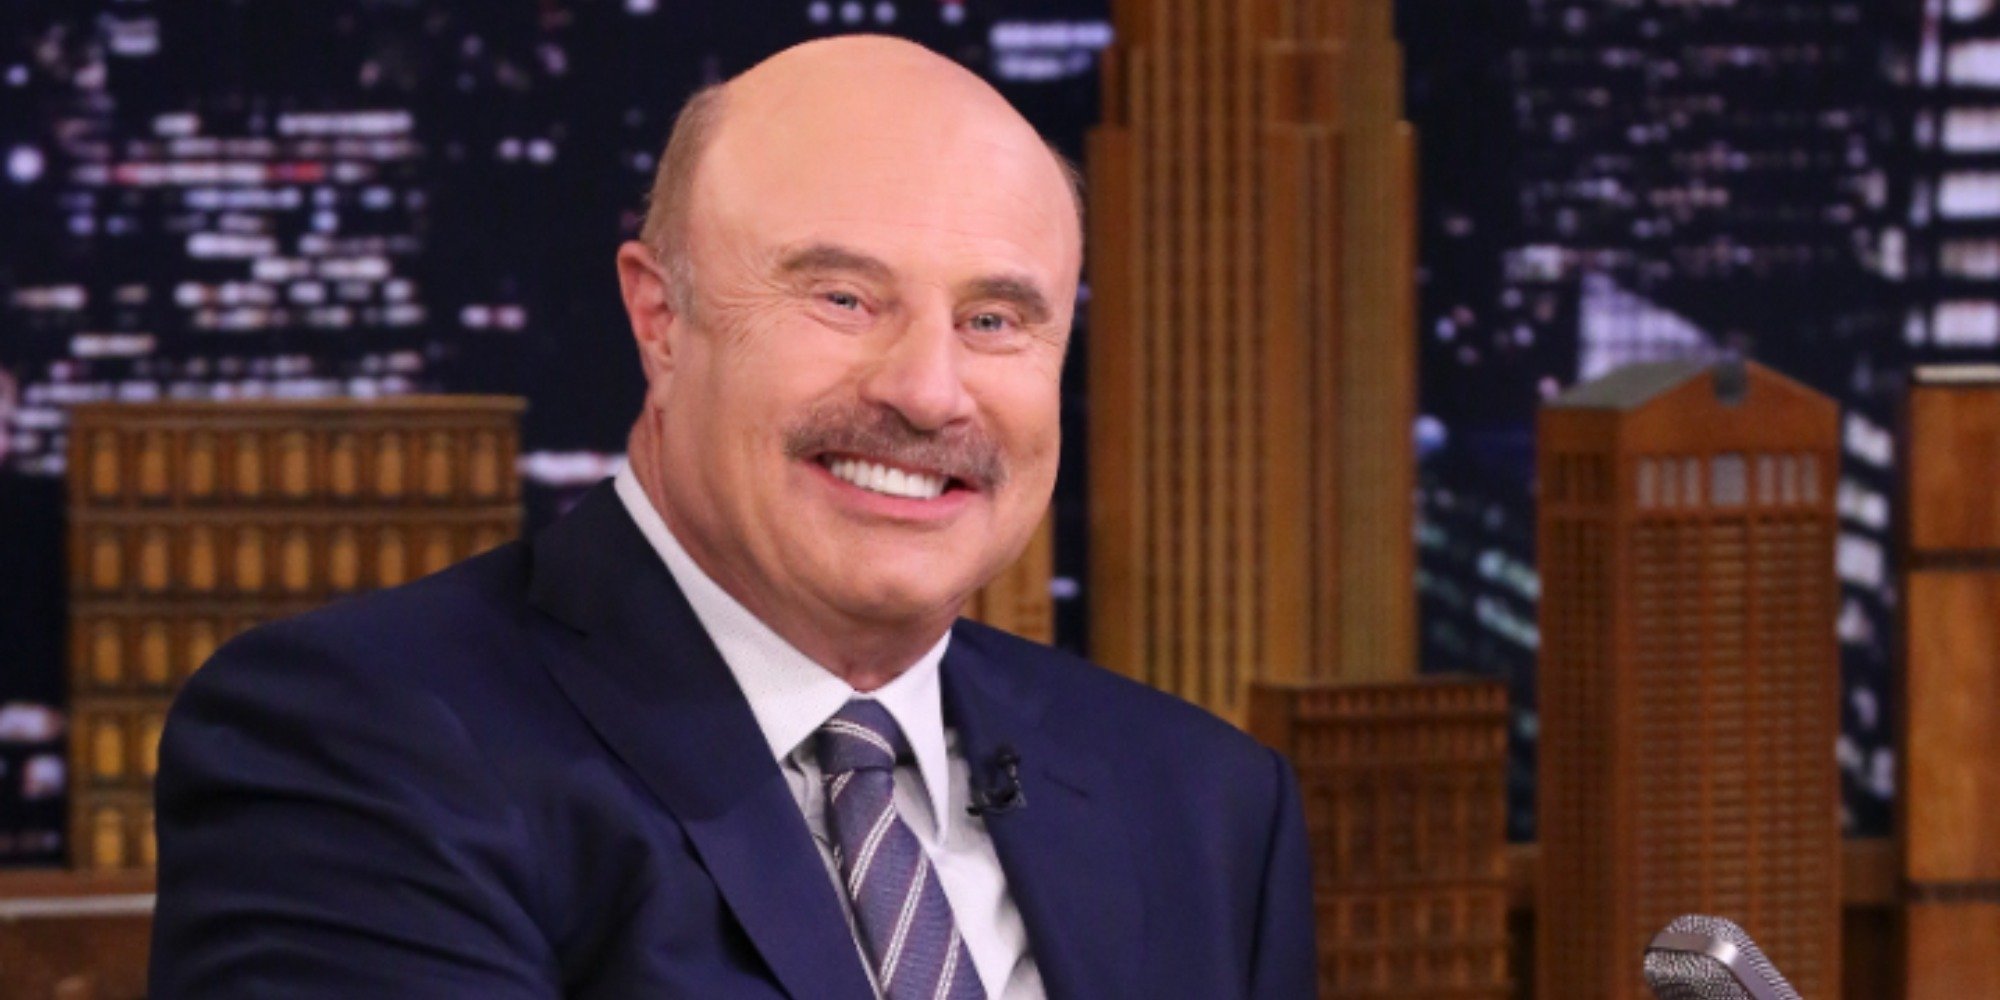 Dr. Phil McGraw appears on Jimmy Fallon.